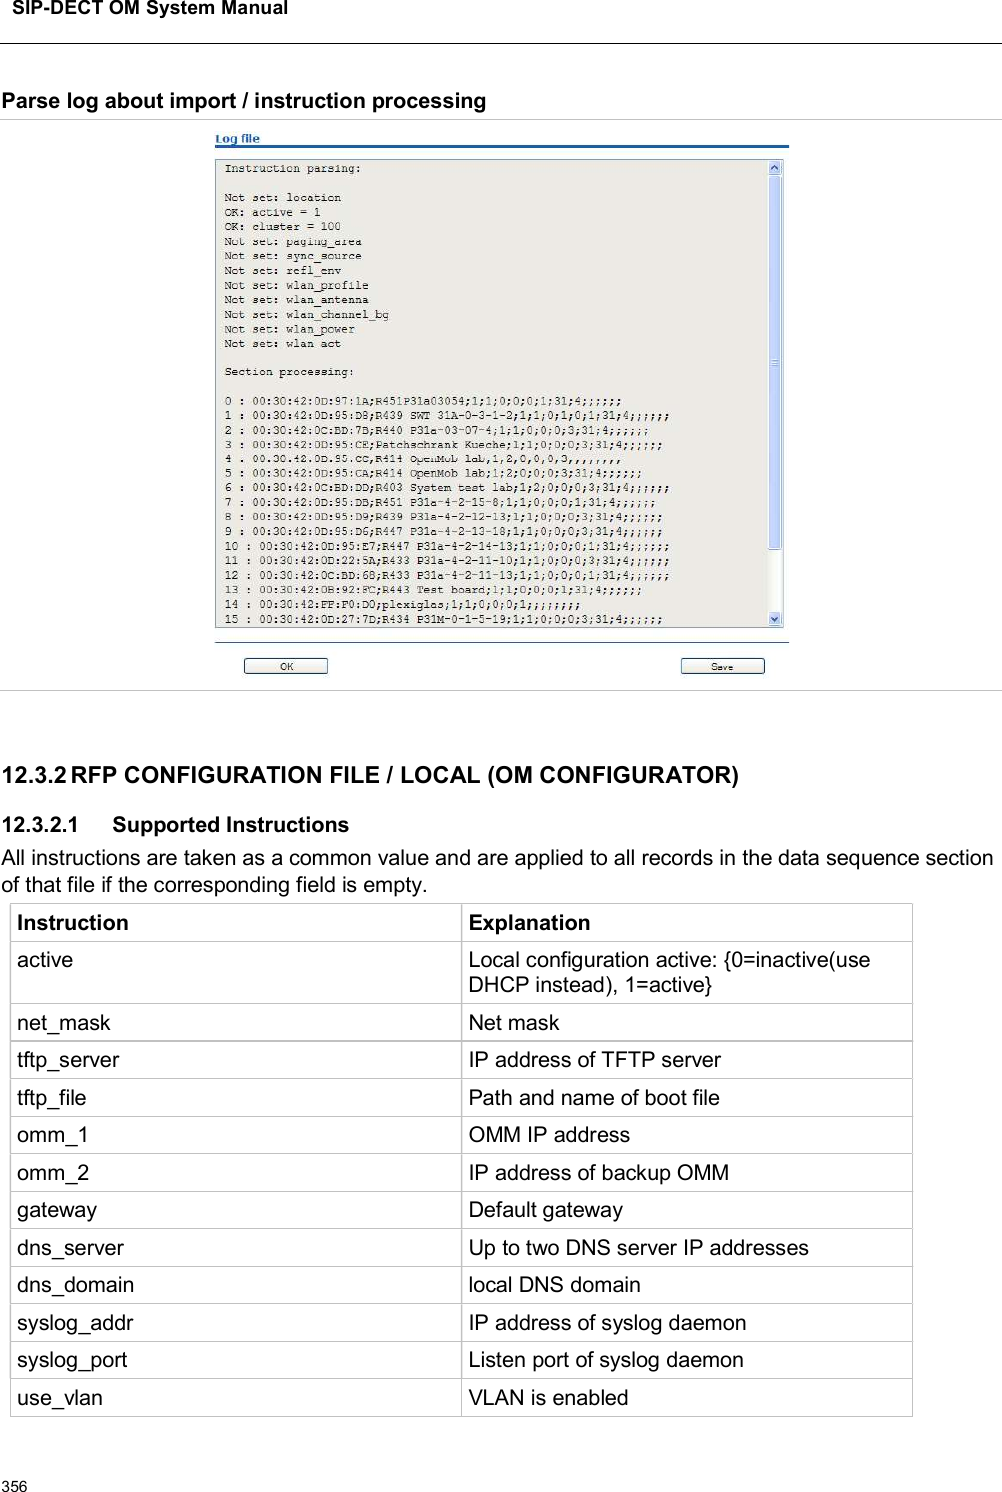 SIP-DECT OM System Manual356Parse log about import / instruction processing12.3.2 RFP CONFIGURATION FILE / LOCAL (OM CONFIGURATOR)12.3.2.1 Supported InstructionsAll instructions are taken as a common value and are applied to all records in the data sequence section of that file if the corresponding field is empty.Instruction Explanationactive Local configuration active: {0=inactive(use DHCP instead), 1=active}net_mask Net masktftp_server IP address of TFTP servertftp_file Path and name of boot fileomm_1 OMM IP addressomm_2 IP address of backup OMMgateway Default gatewaydns_server Up to two DNS server IP addressesdns_domain local DNS domainsyslog_addr IP address of syslog daemonsyslog_port Listen port of syslog daemonuse_vlan VLAN is enabled